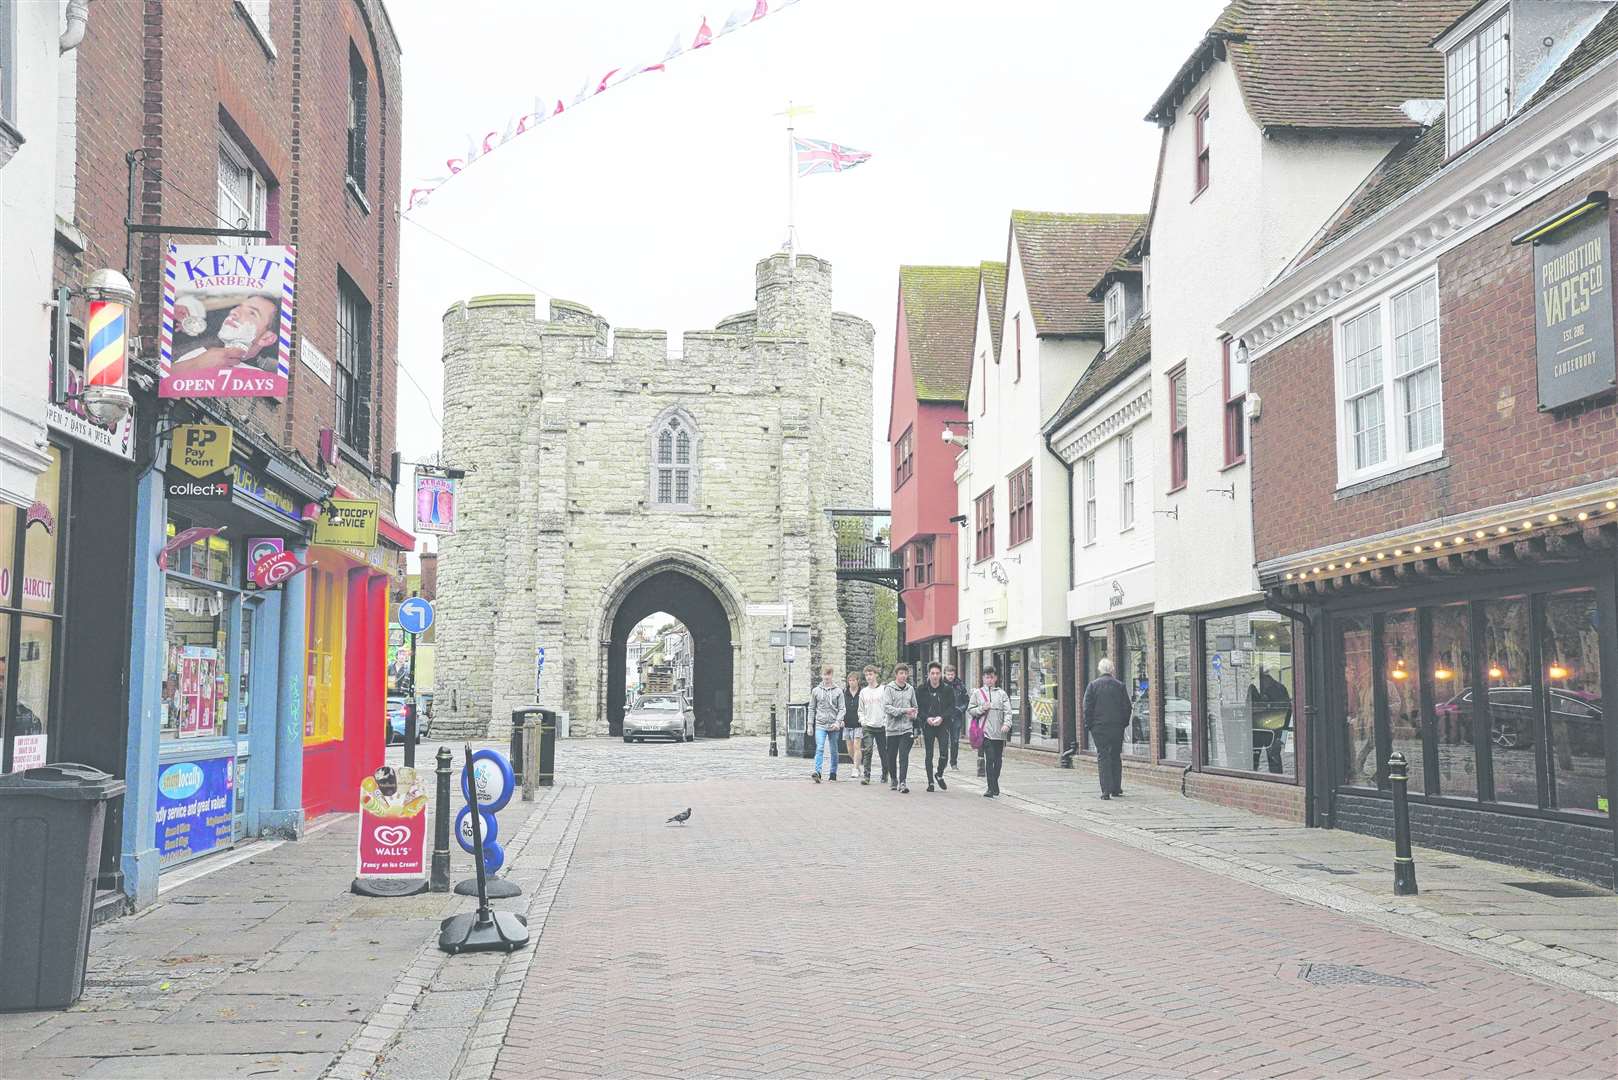 Bollards will be installed at the lower end of the high street